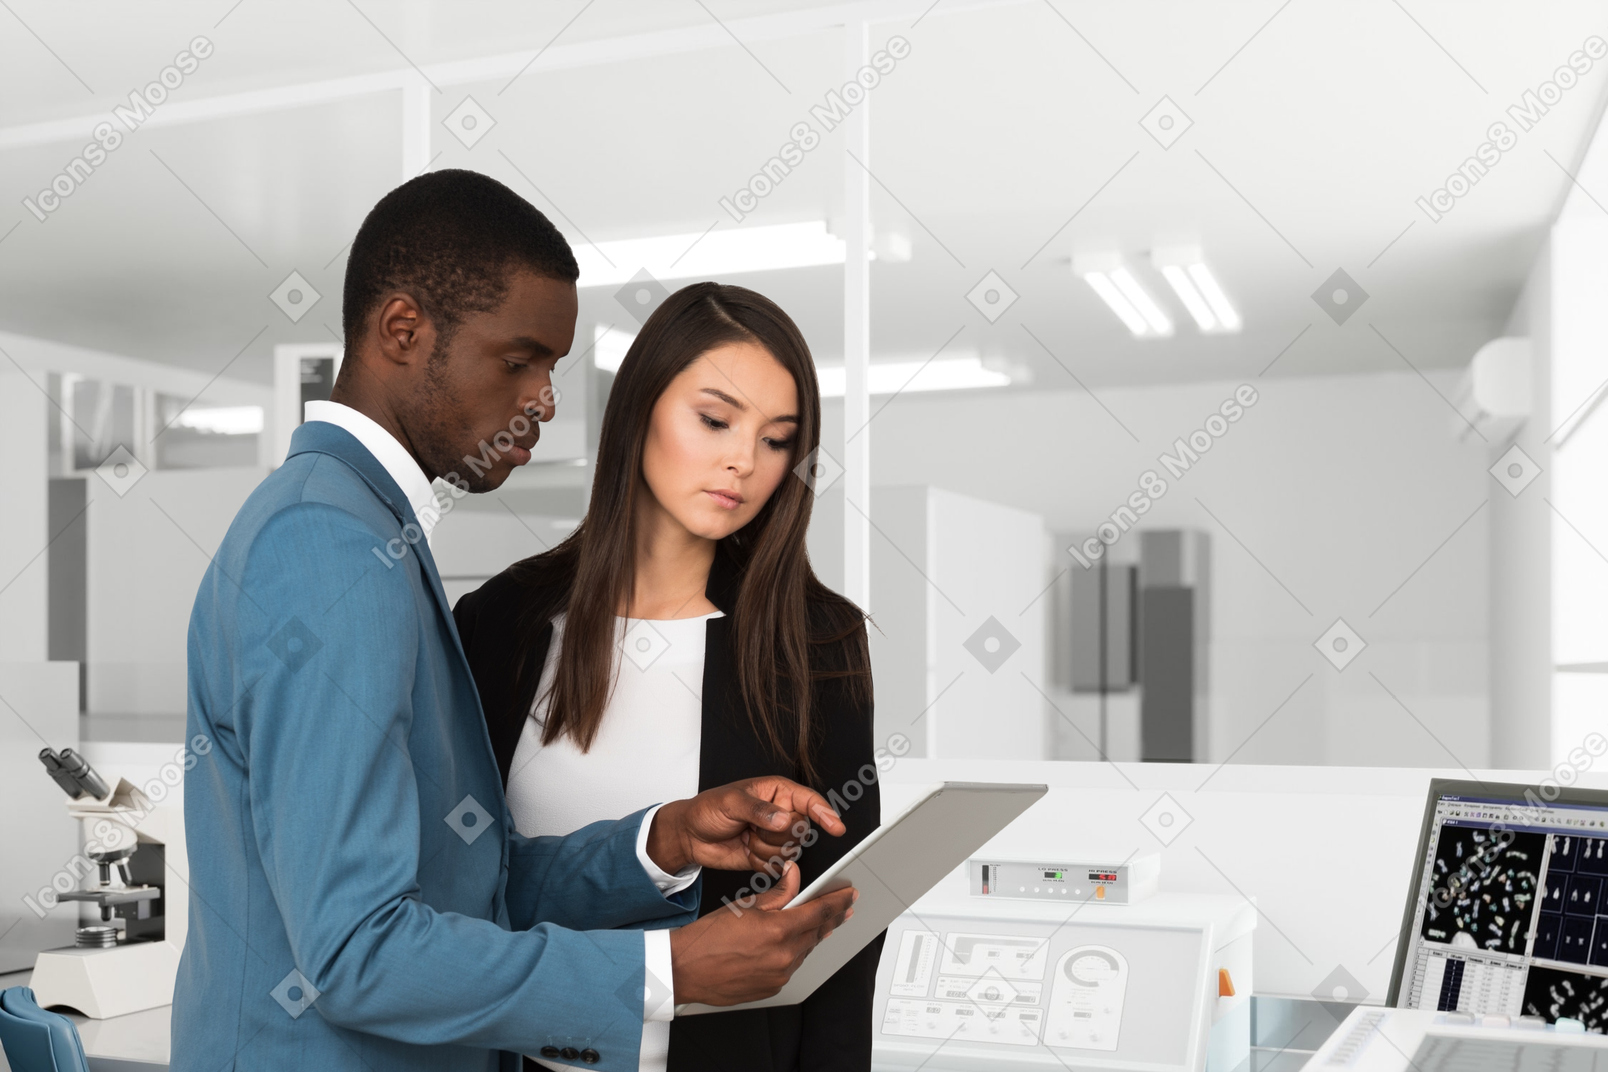 Two young people standing in a medical laboratory and using a tablet